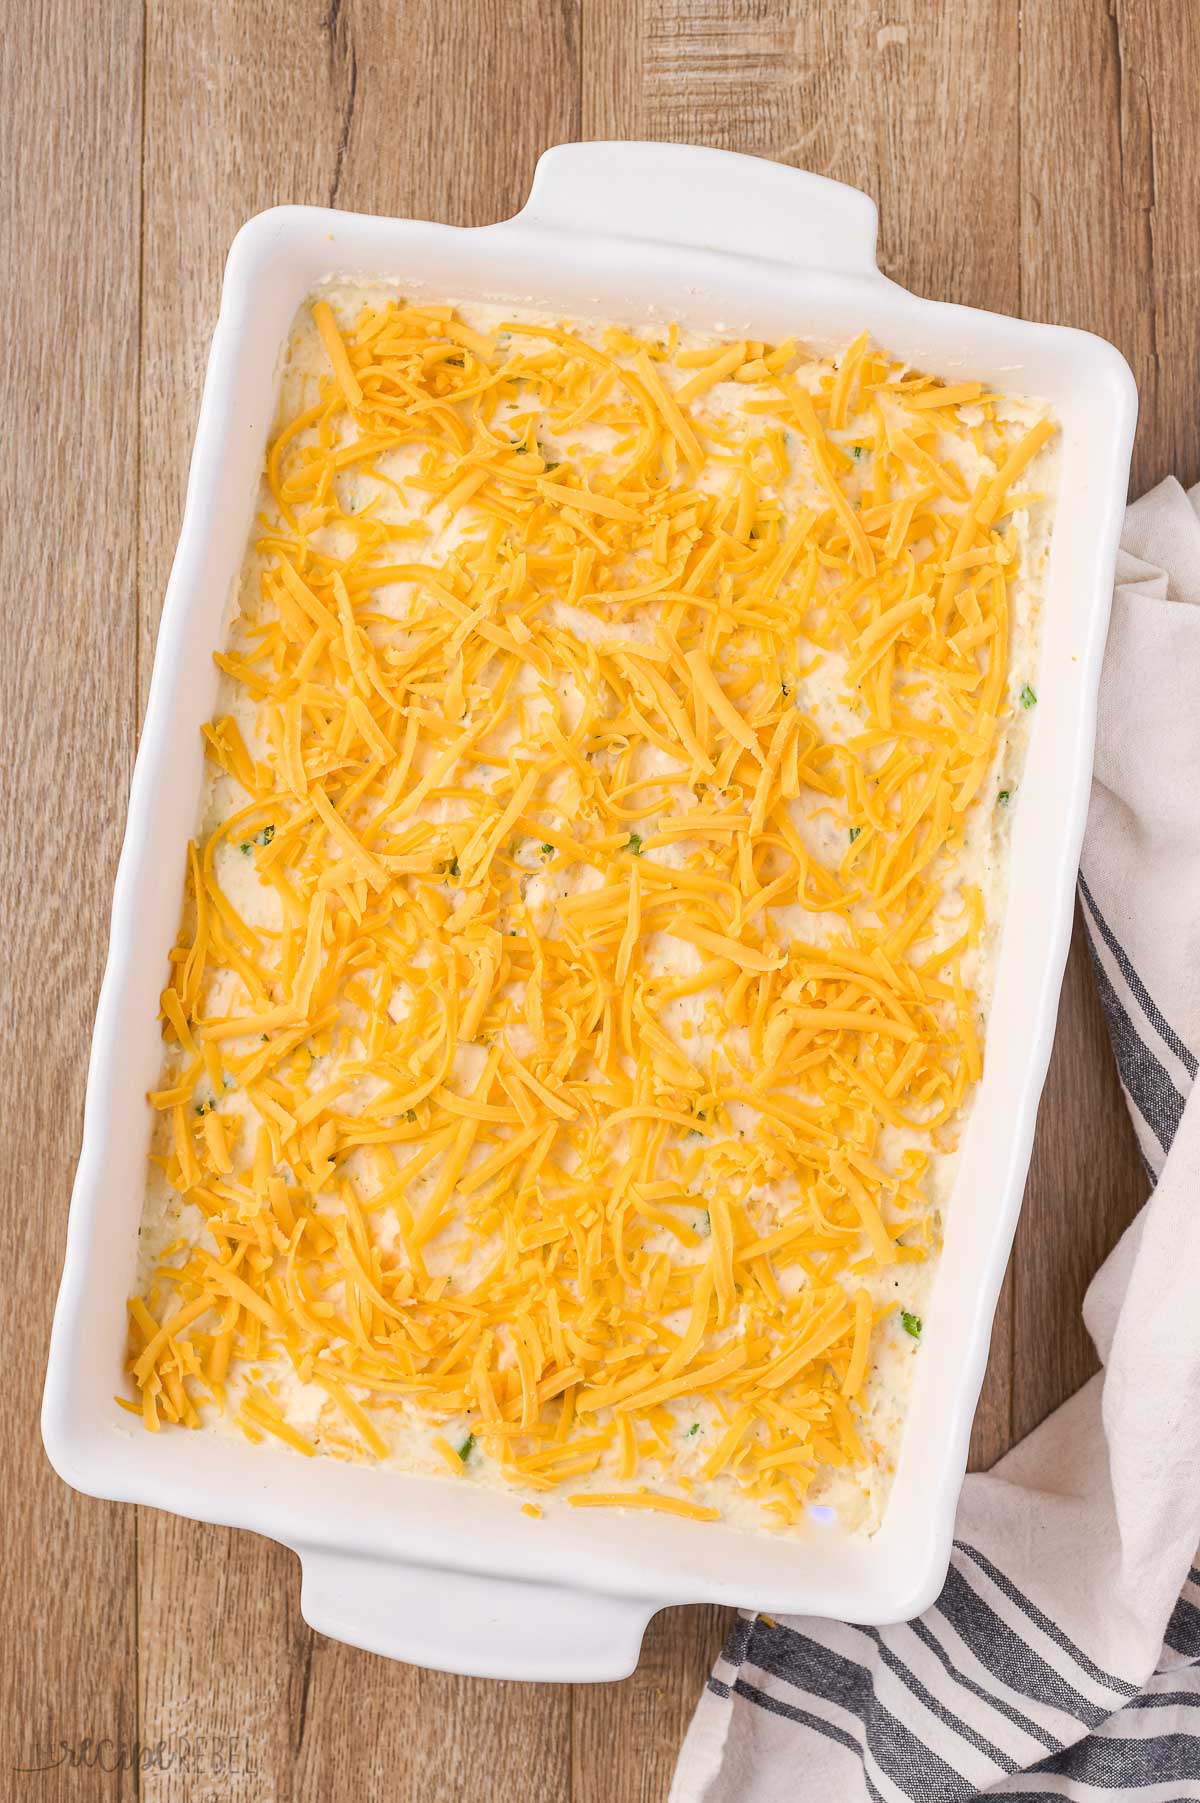 shredded cheddar cheese on top of pan of mashed potatoes